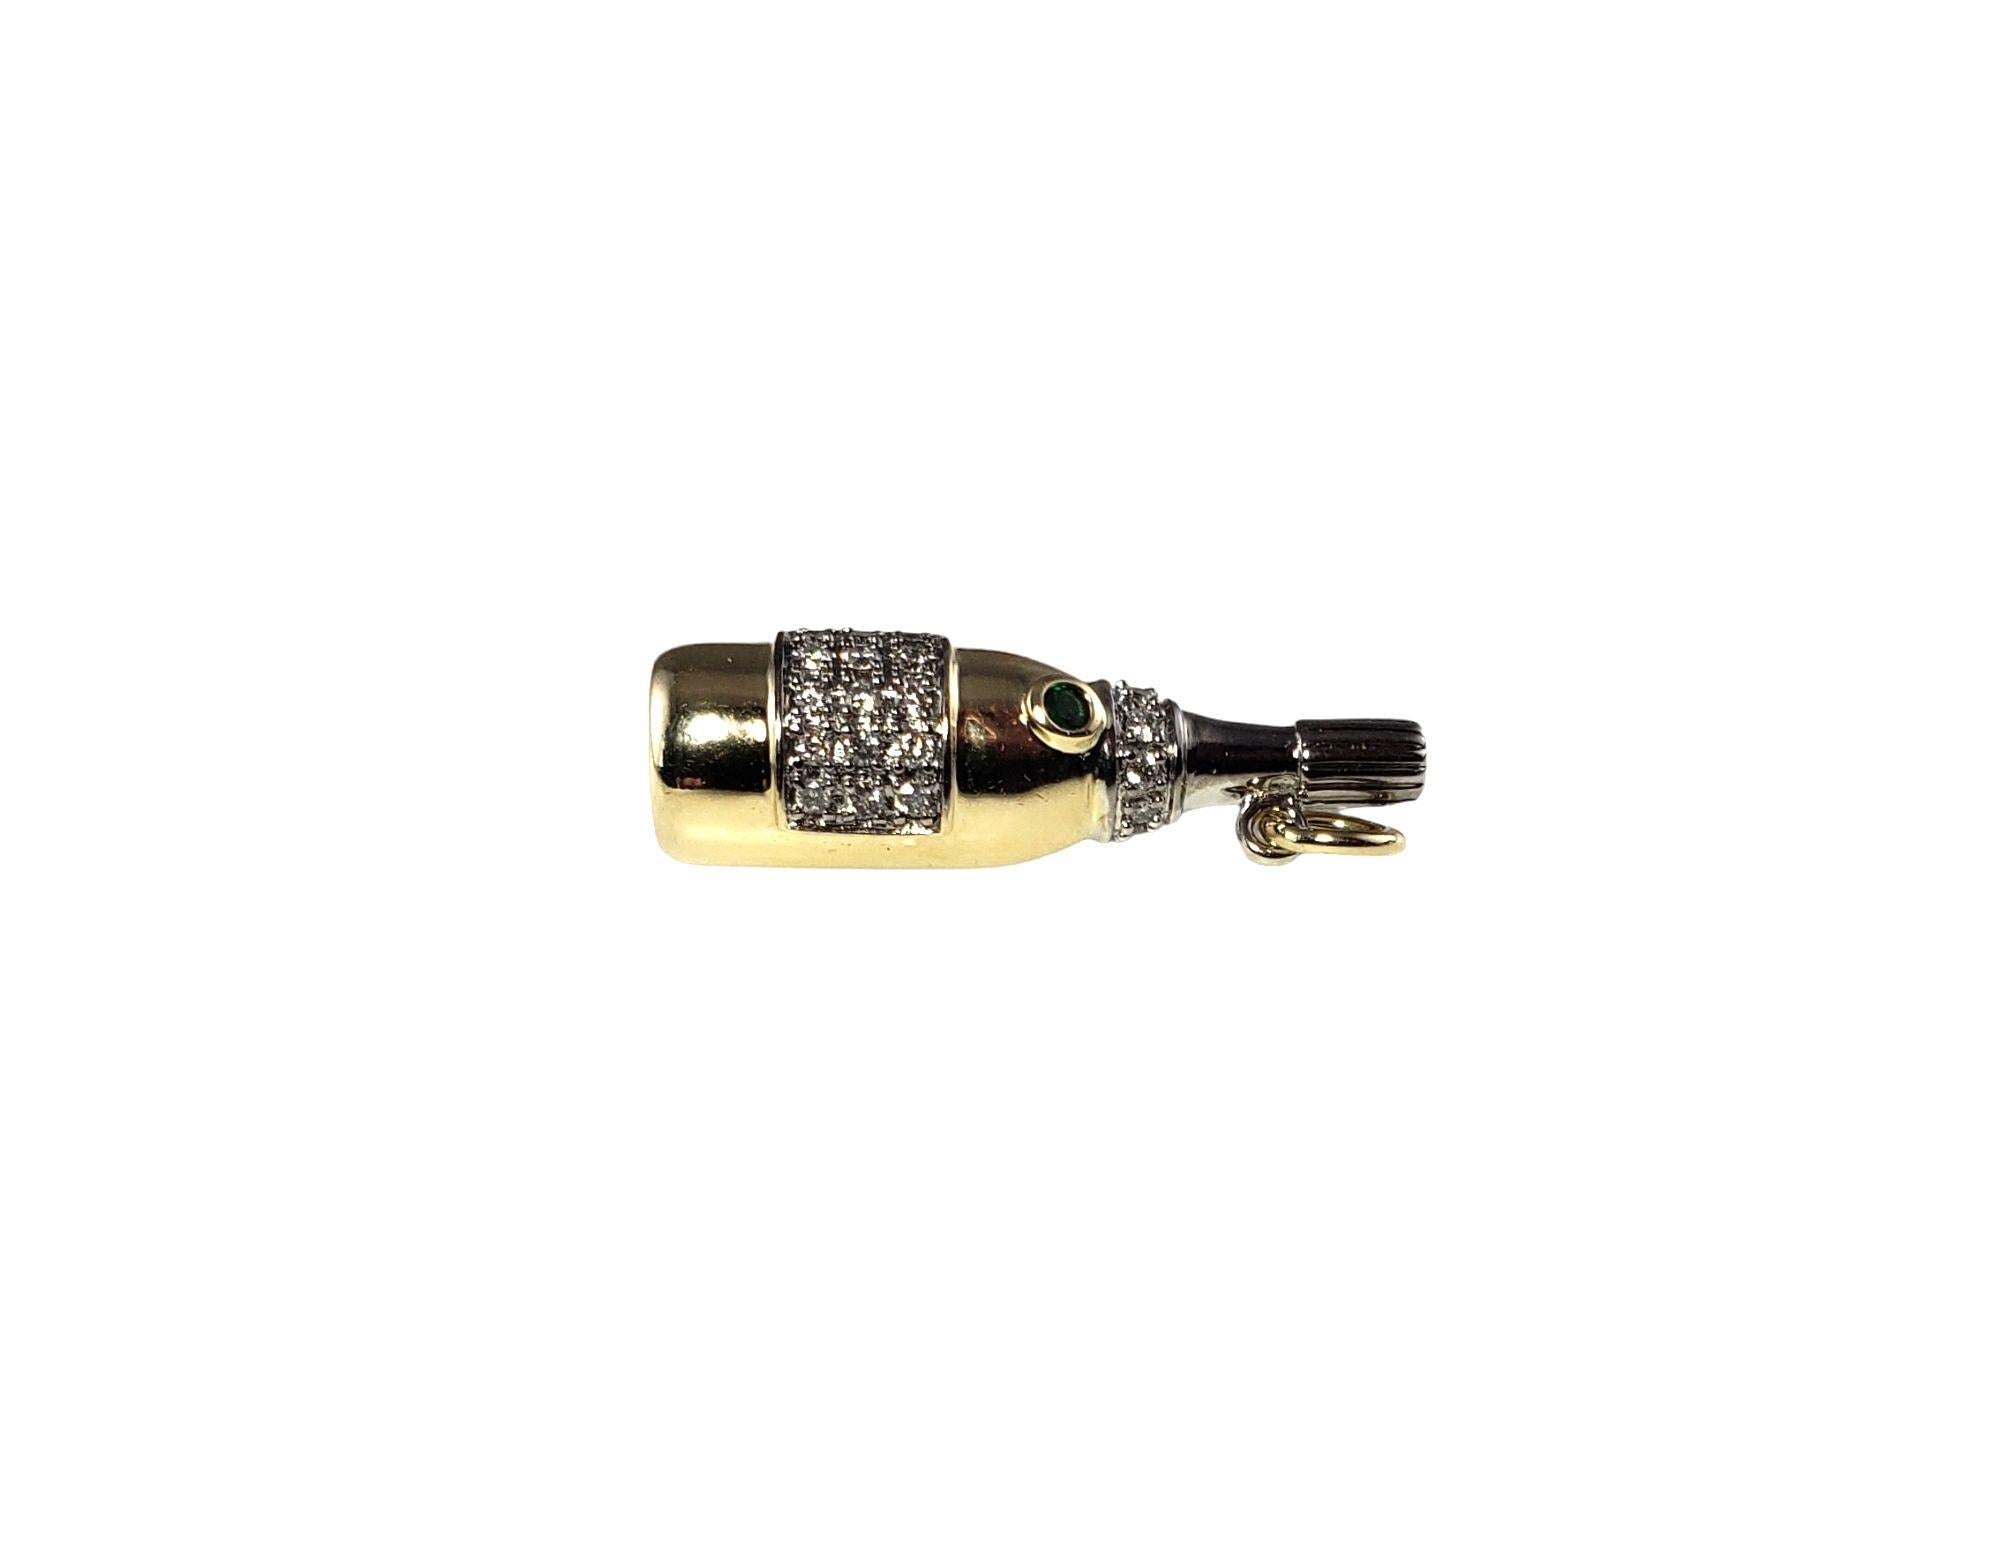 Vintage 14 Karat Yellow Gold and Diamond Champagne Bottle Charm-

Time to celebrate!

This lovely 3D champagne bottle charm features 24 round brilliant cut diamonds and one green gemstone set in beautifully detailed 14K yellow gold.

Approximate